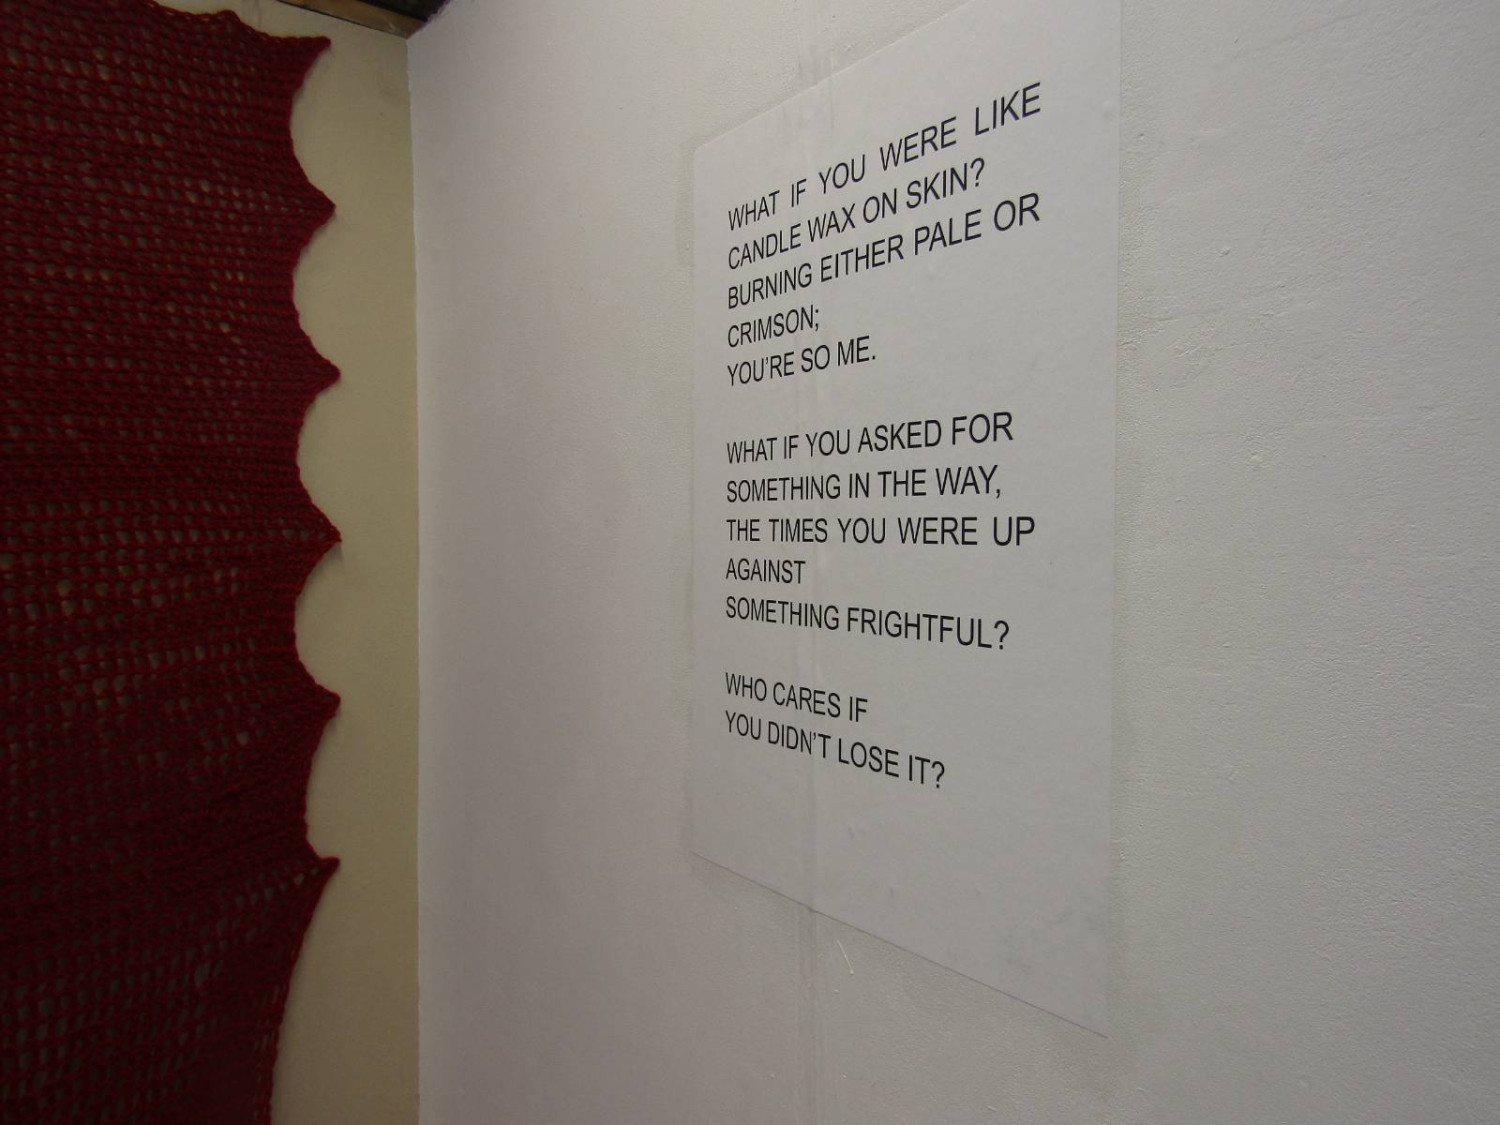 Installation view including crochet work and wallpapered text piece